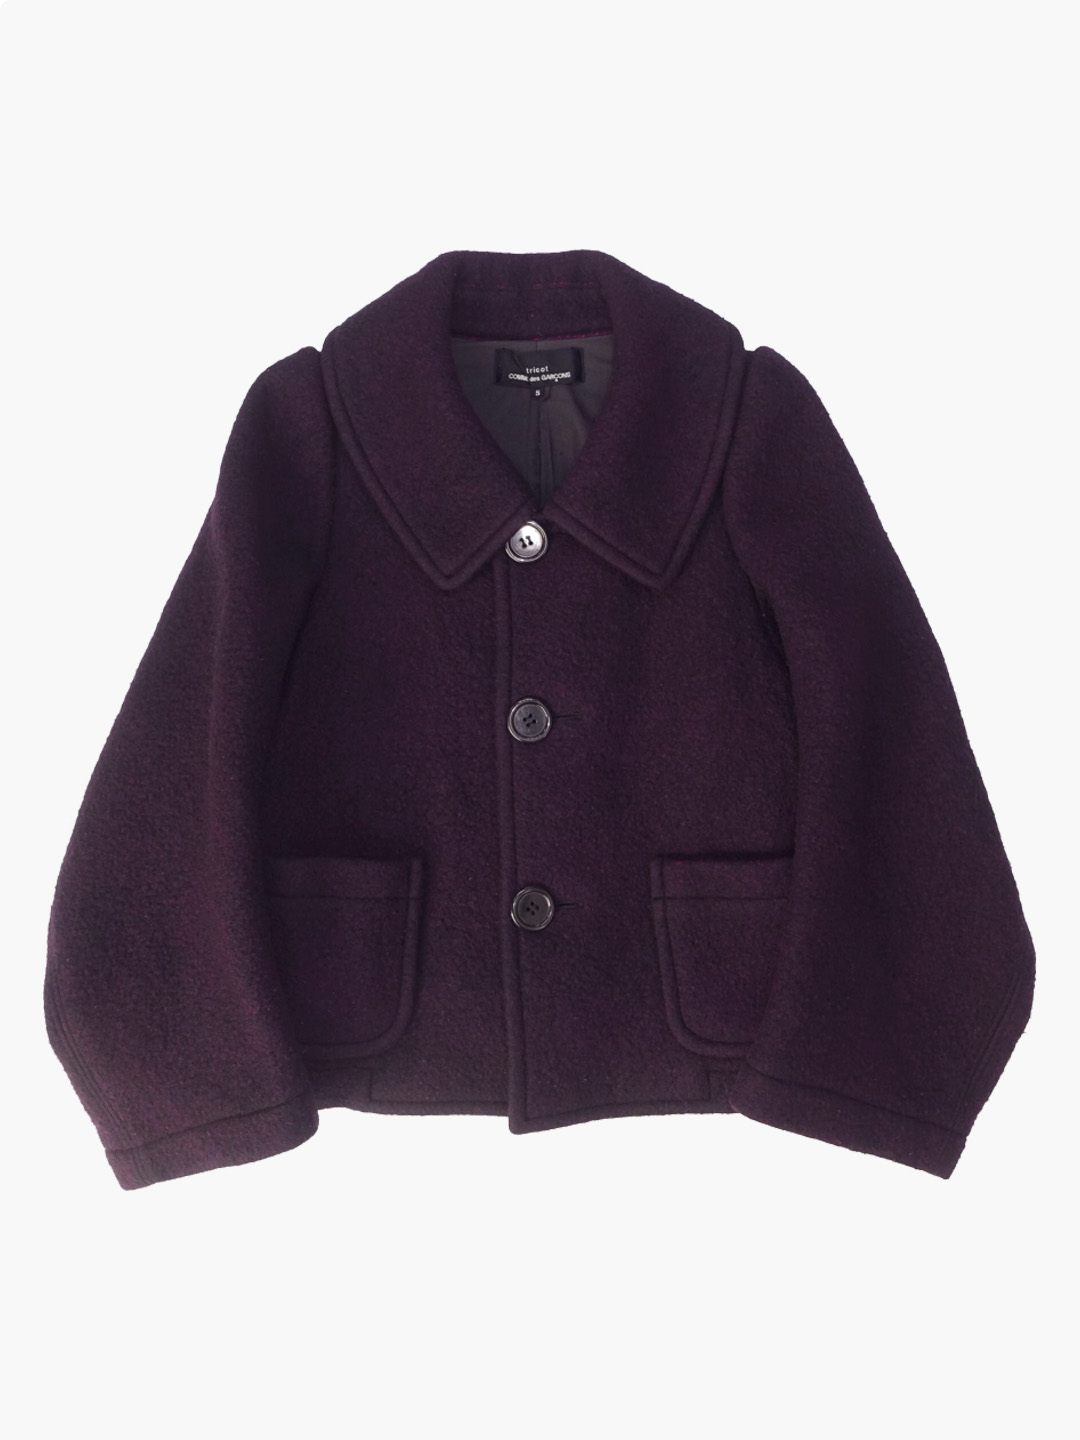 TRICOT COMME DES GARCONSWool jacket